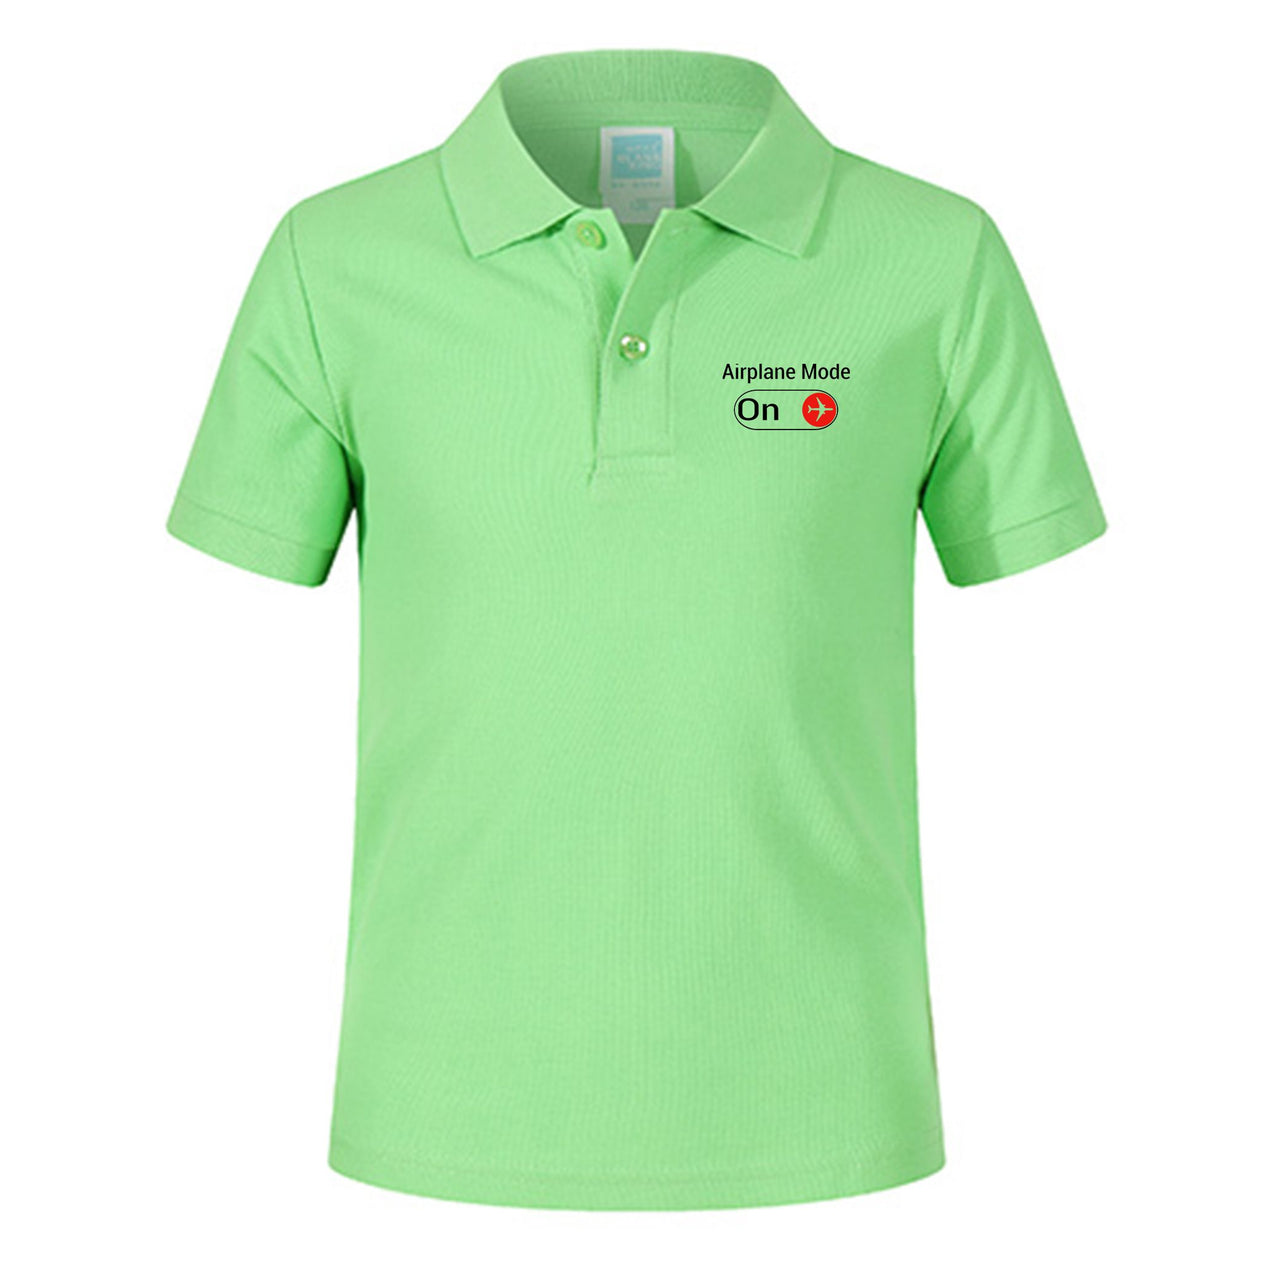 Airplane Mode On Designed Children Polo T-Shirts